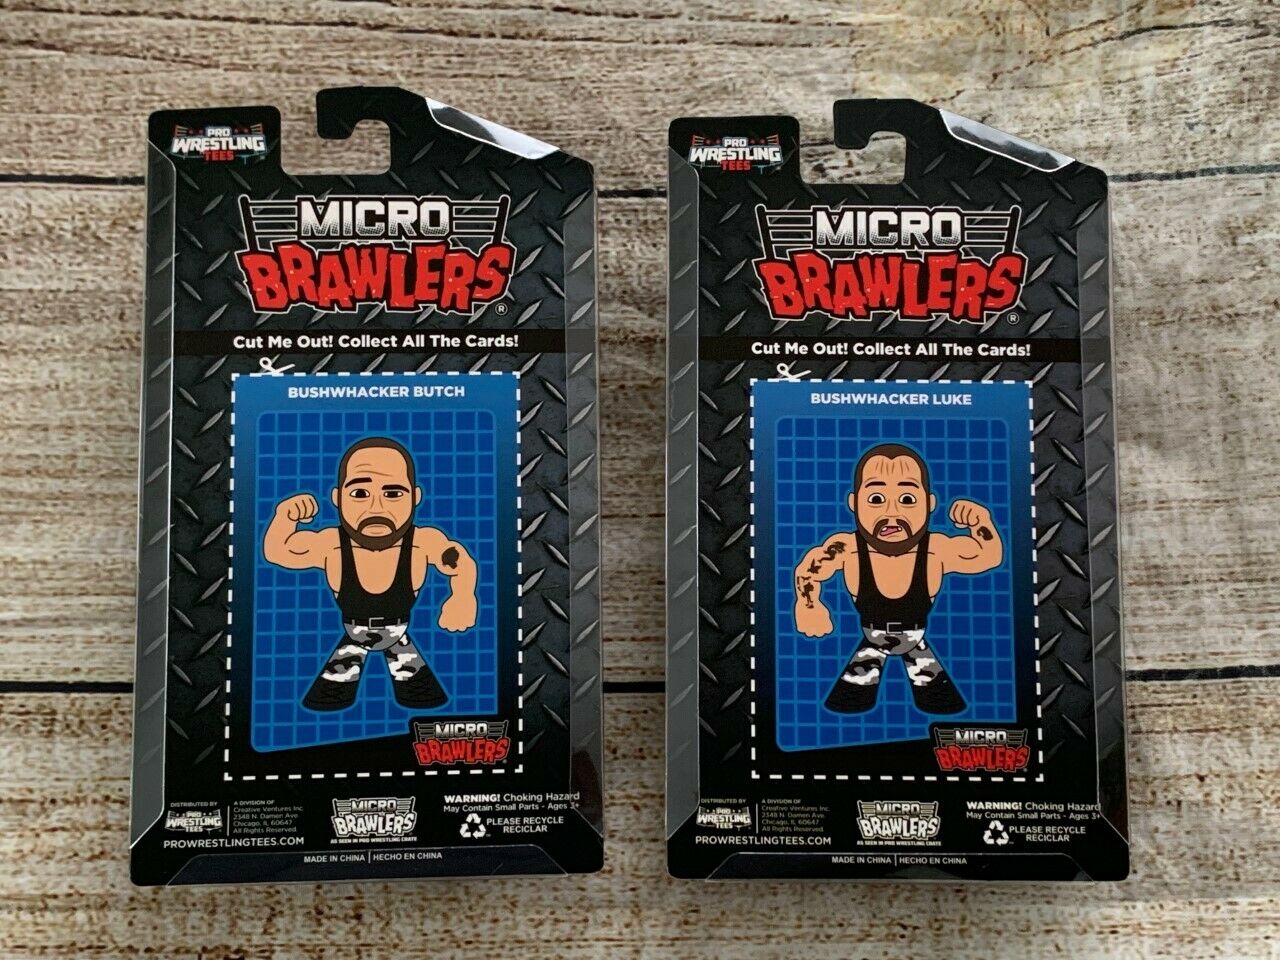 2022 Pro Wrestling Tees Micro Brawlers Limited Edition The